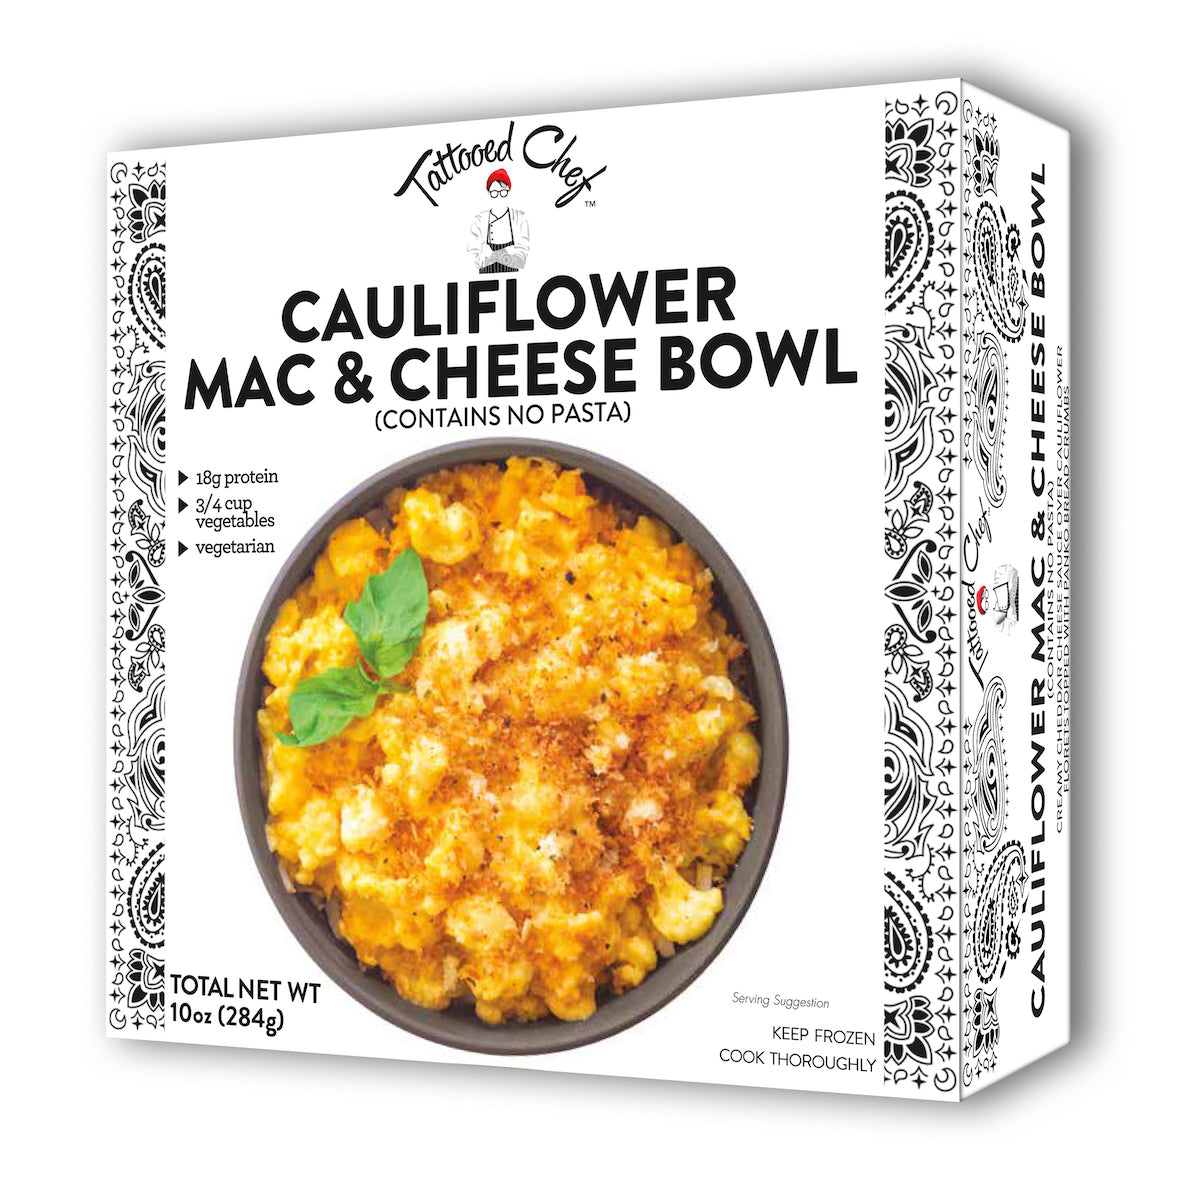 Tattooed Chef Cauliflower Mac  Cheese Bowl  Shop Meals  Sides at HEB